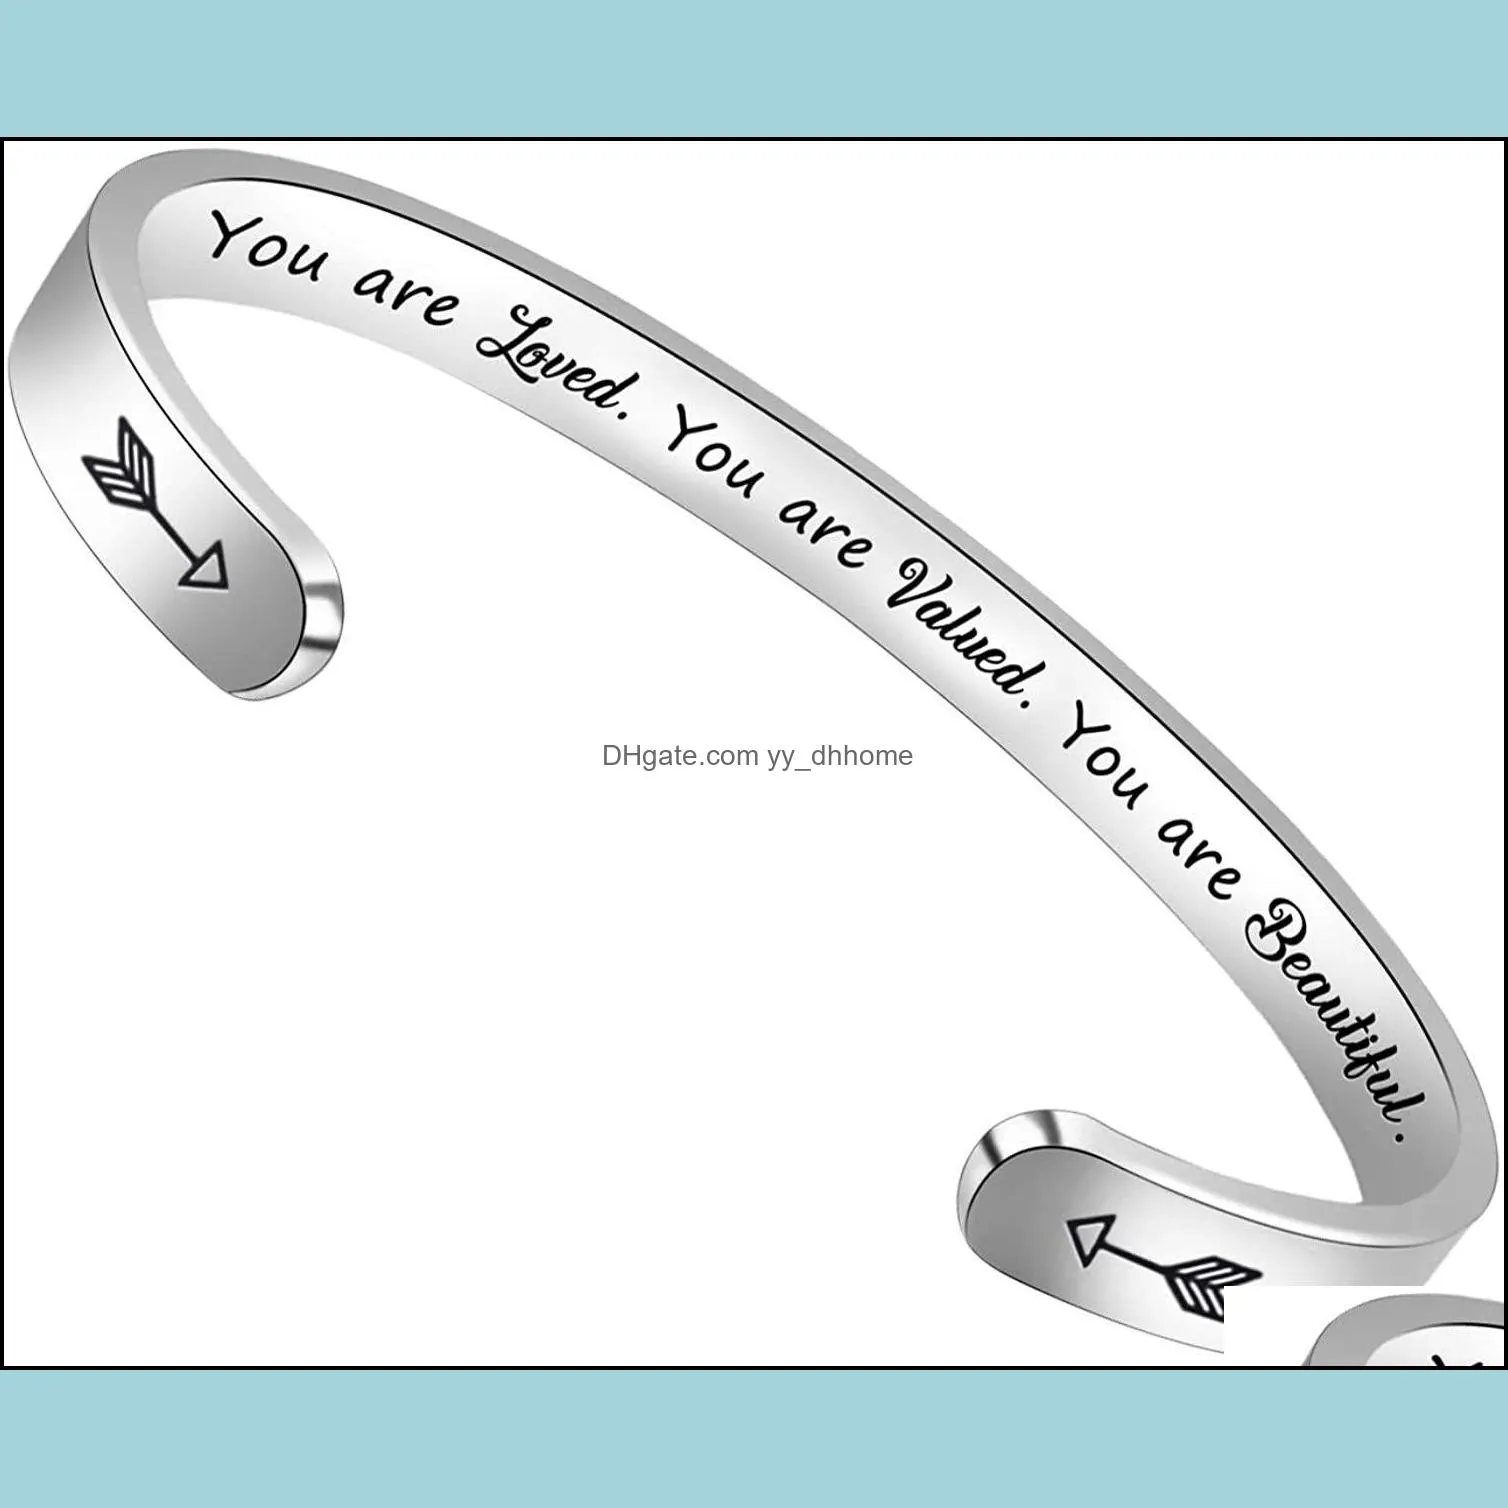 stainless steel open cuff bracelet bangels friendship jewelry personalized letter initial bracelets you are loved jewellry